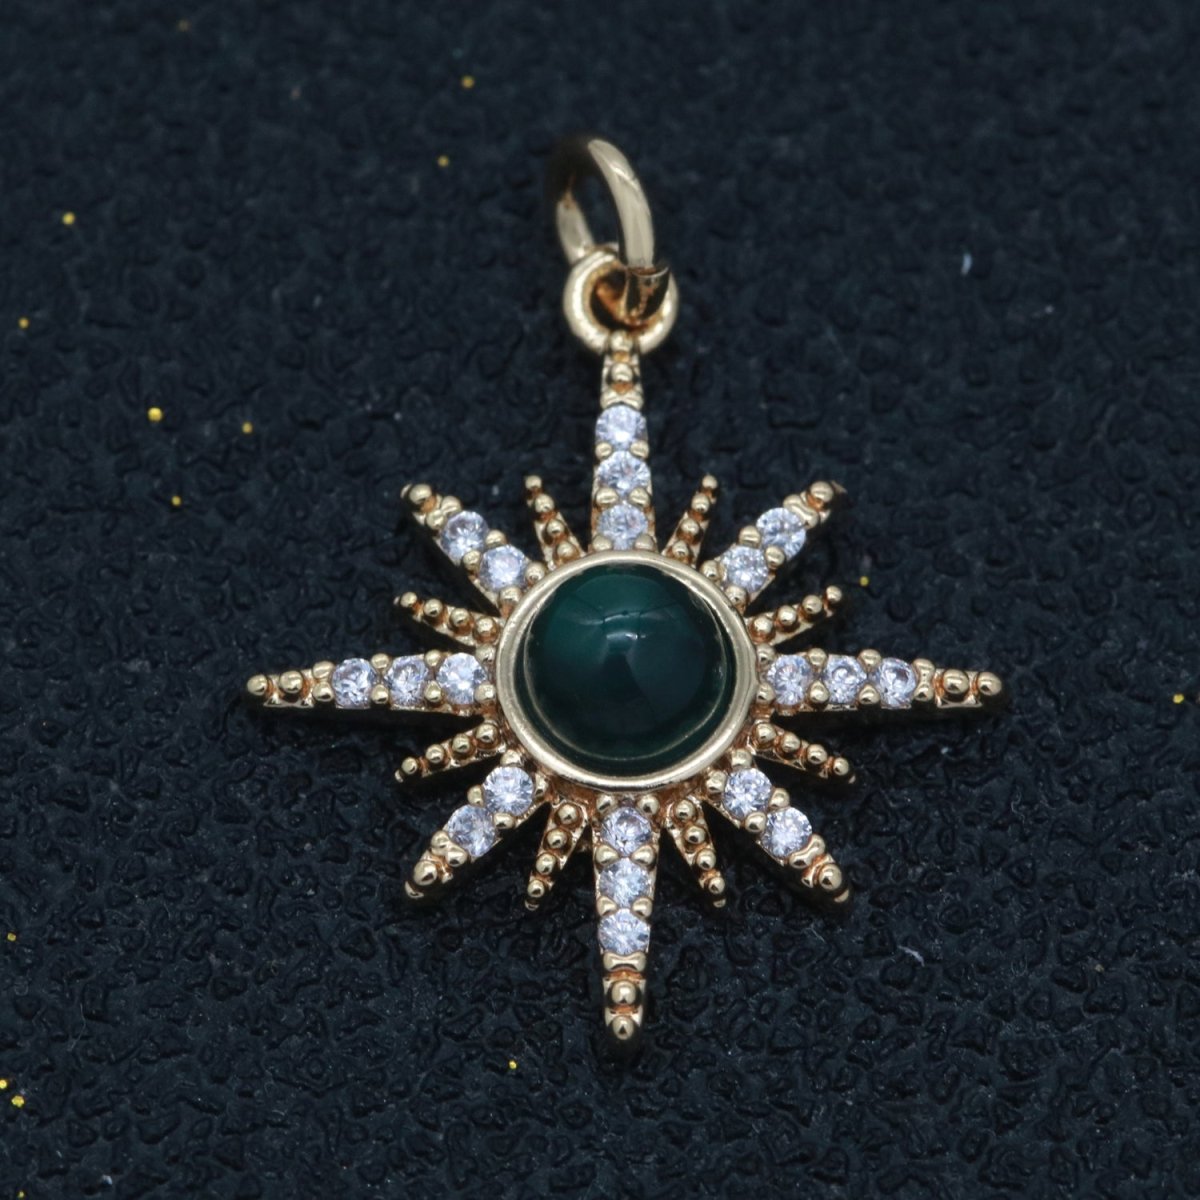 OS DEL-Dainty 18K Gold Filled Star Burst Charm Green CZ Round Star Medallion Pendant, 19.5x15.5mm, Micro Pave Gold Sun Celestial Jewelry | CL-M753 - DLUXCA